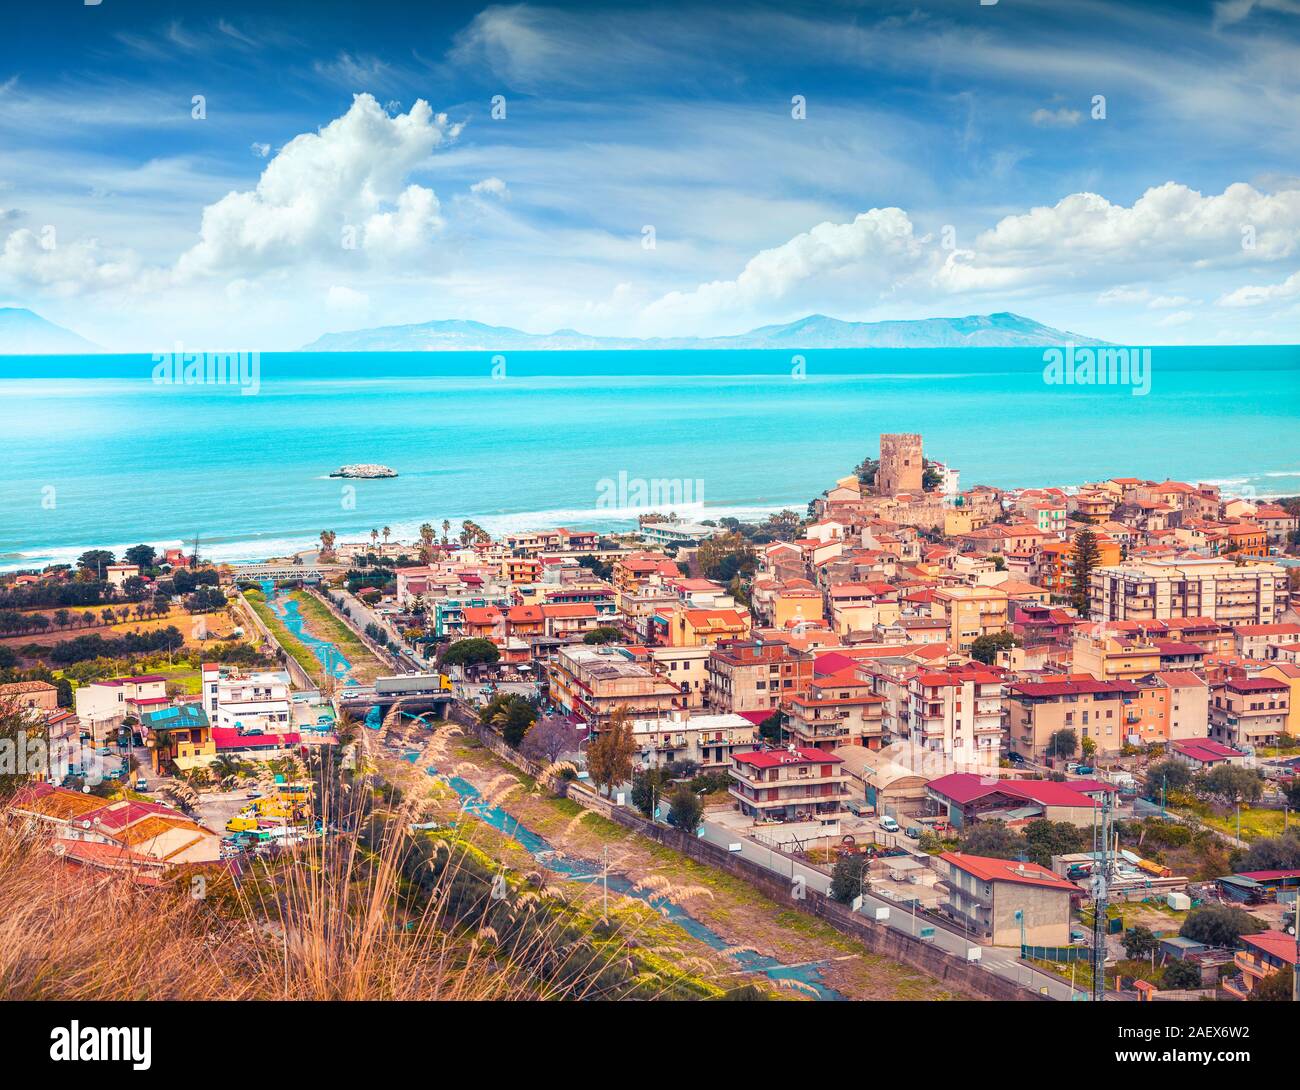 Colorful spring view of Brolo town, Messina. Mediterranean rea, Sicily, Italy, Europe. Instagram toning. Stock Photo